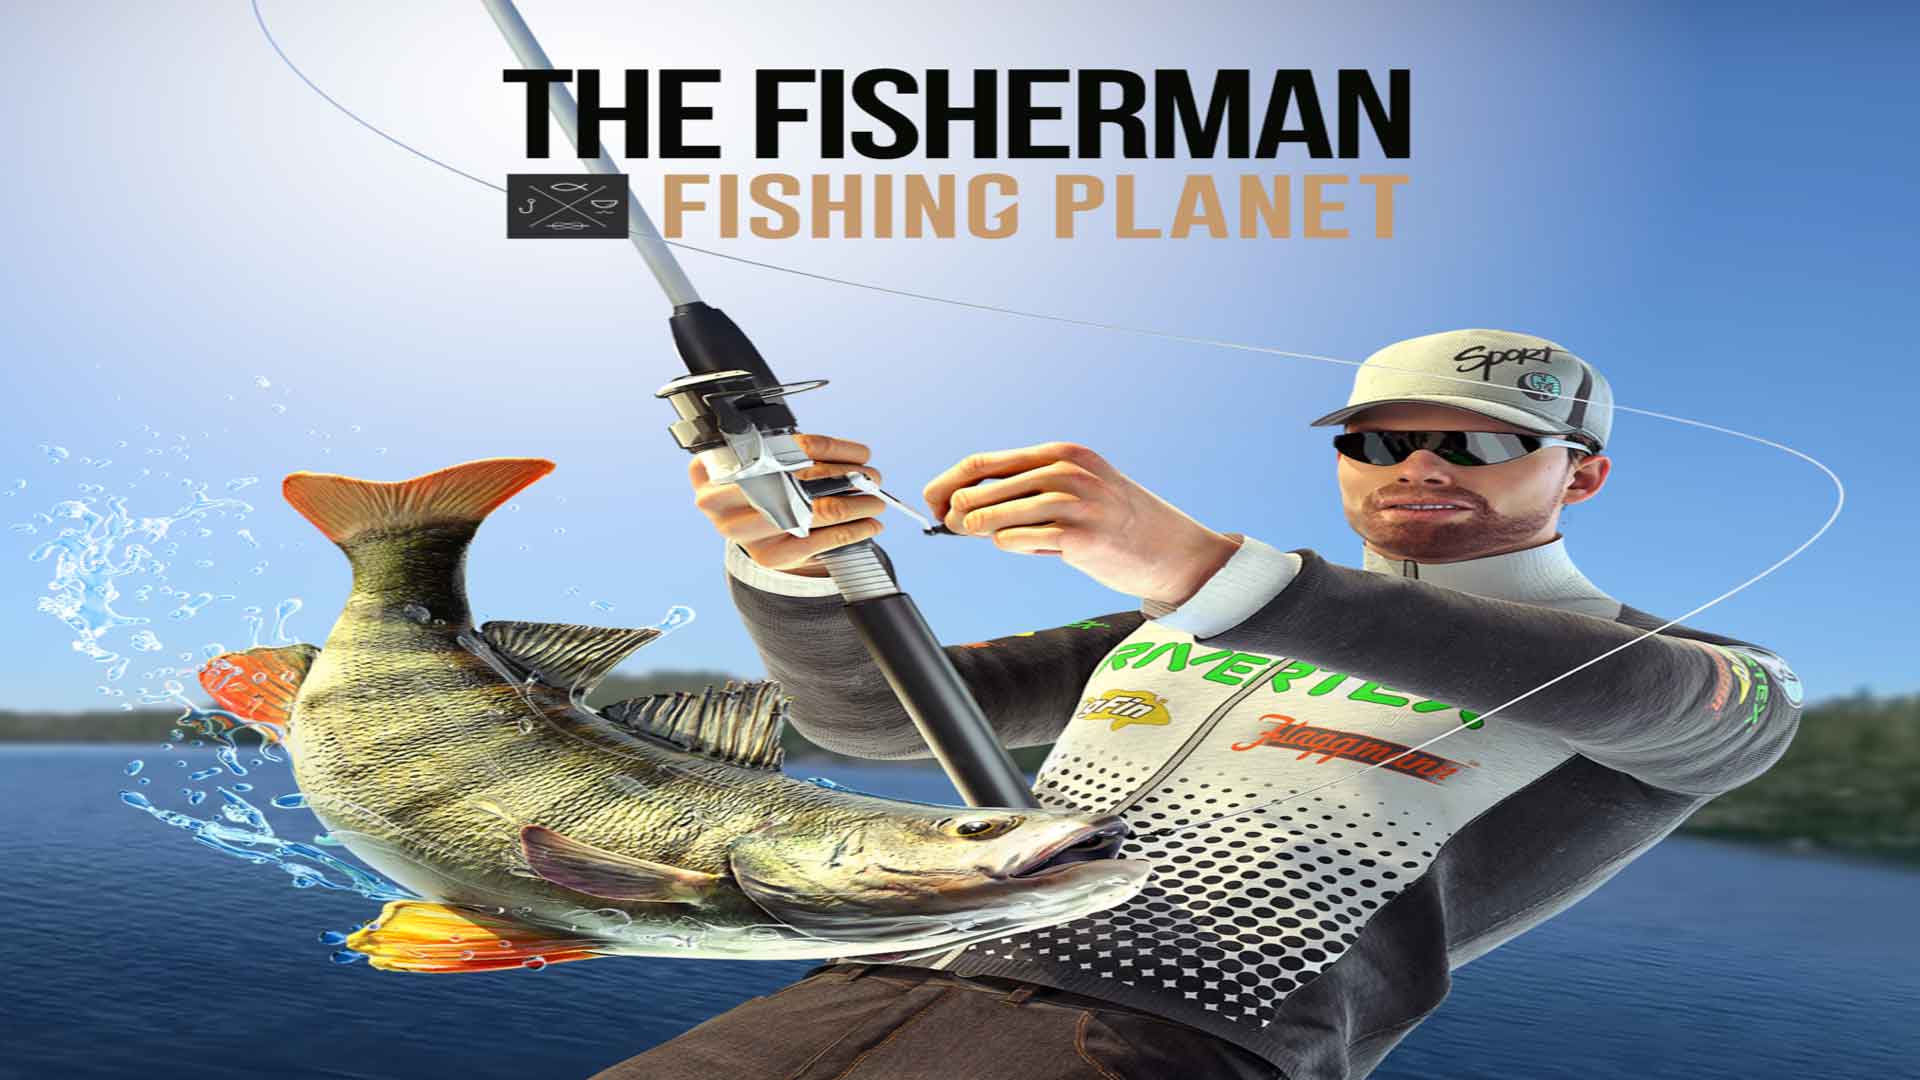 the fisherman - fishing planet recensione